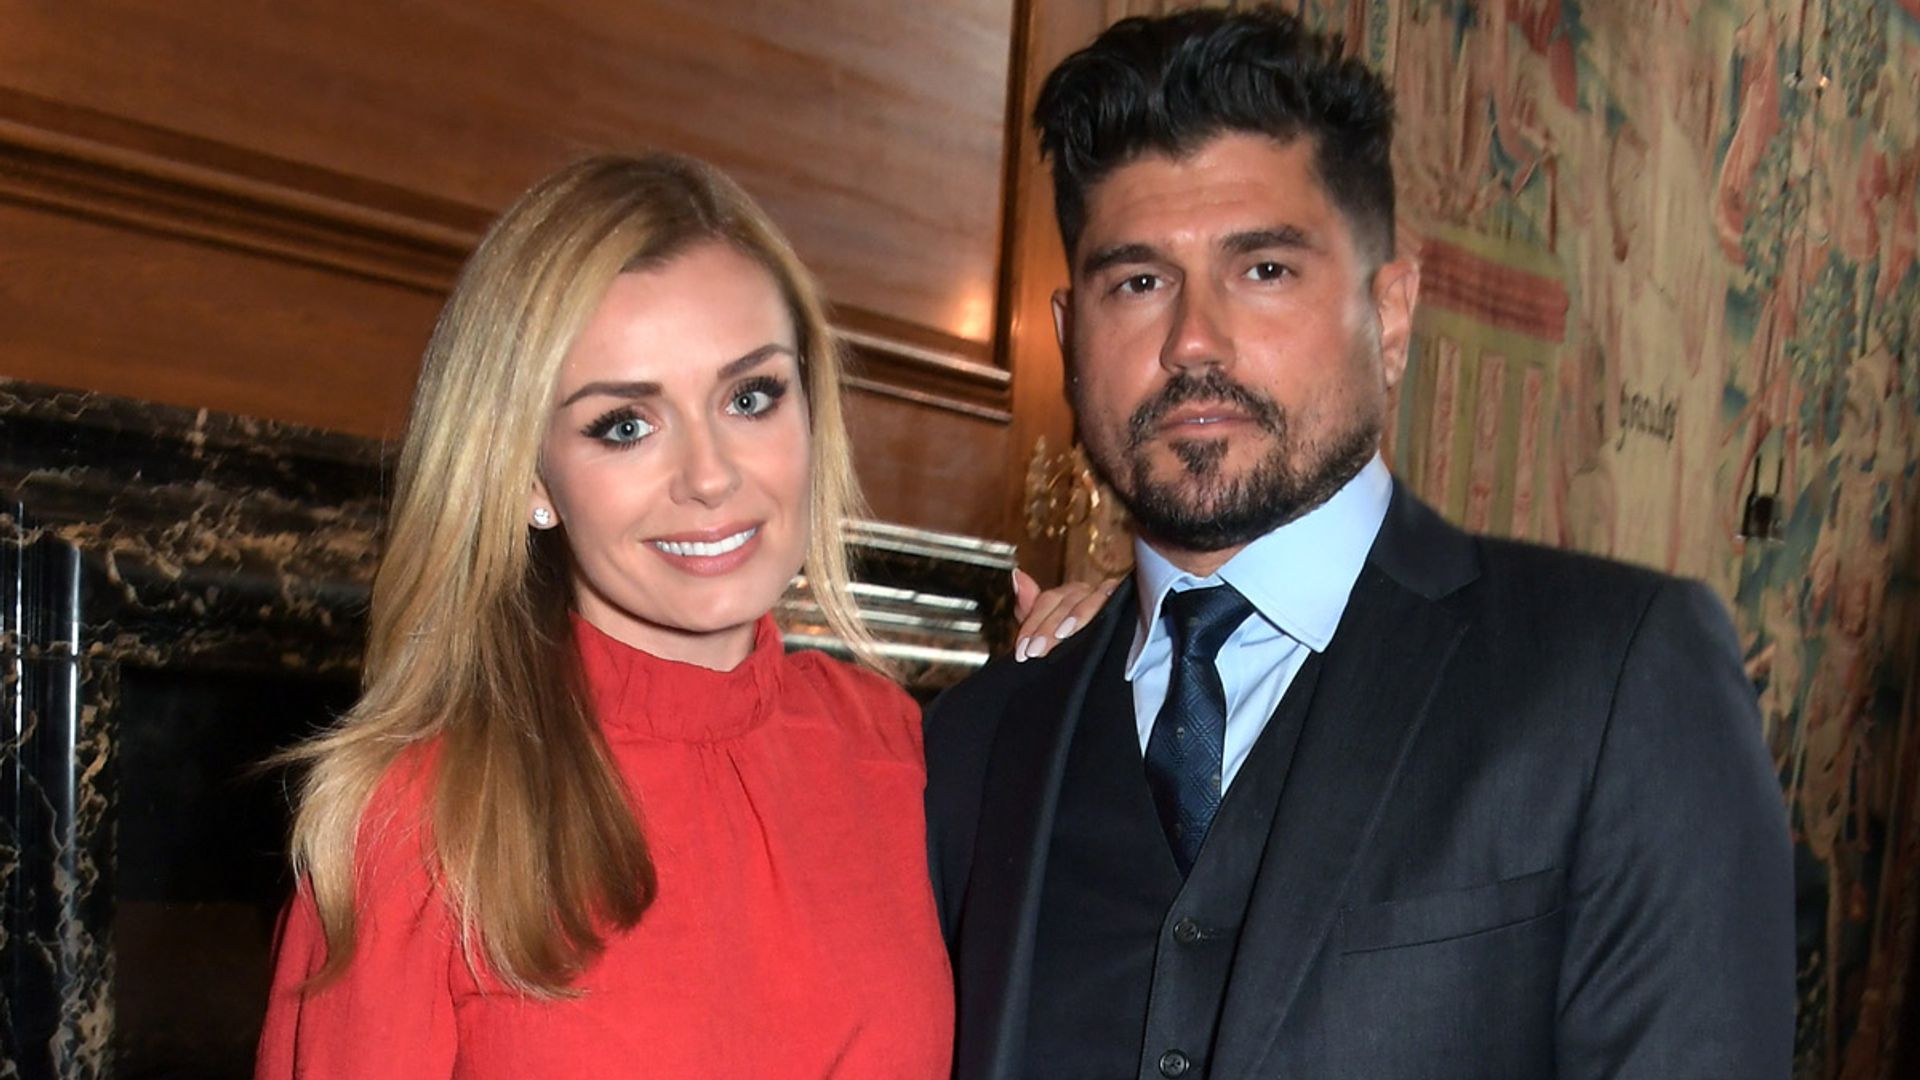 katherine jenkins and husband andrew levitas attend prince harry concert